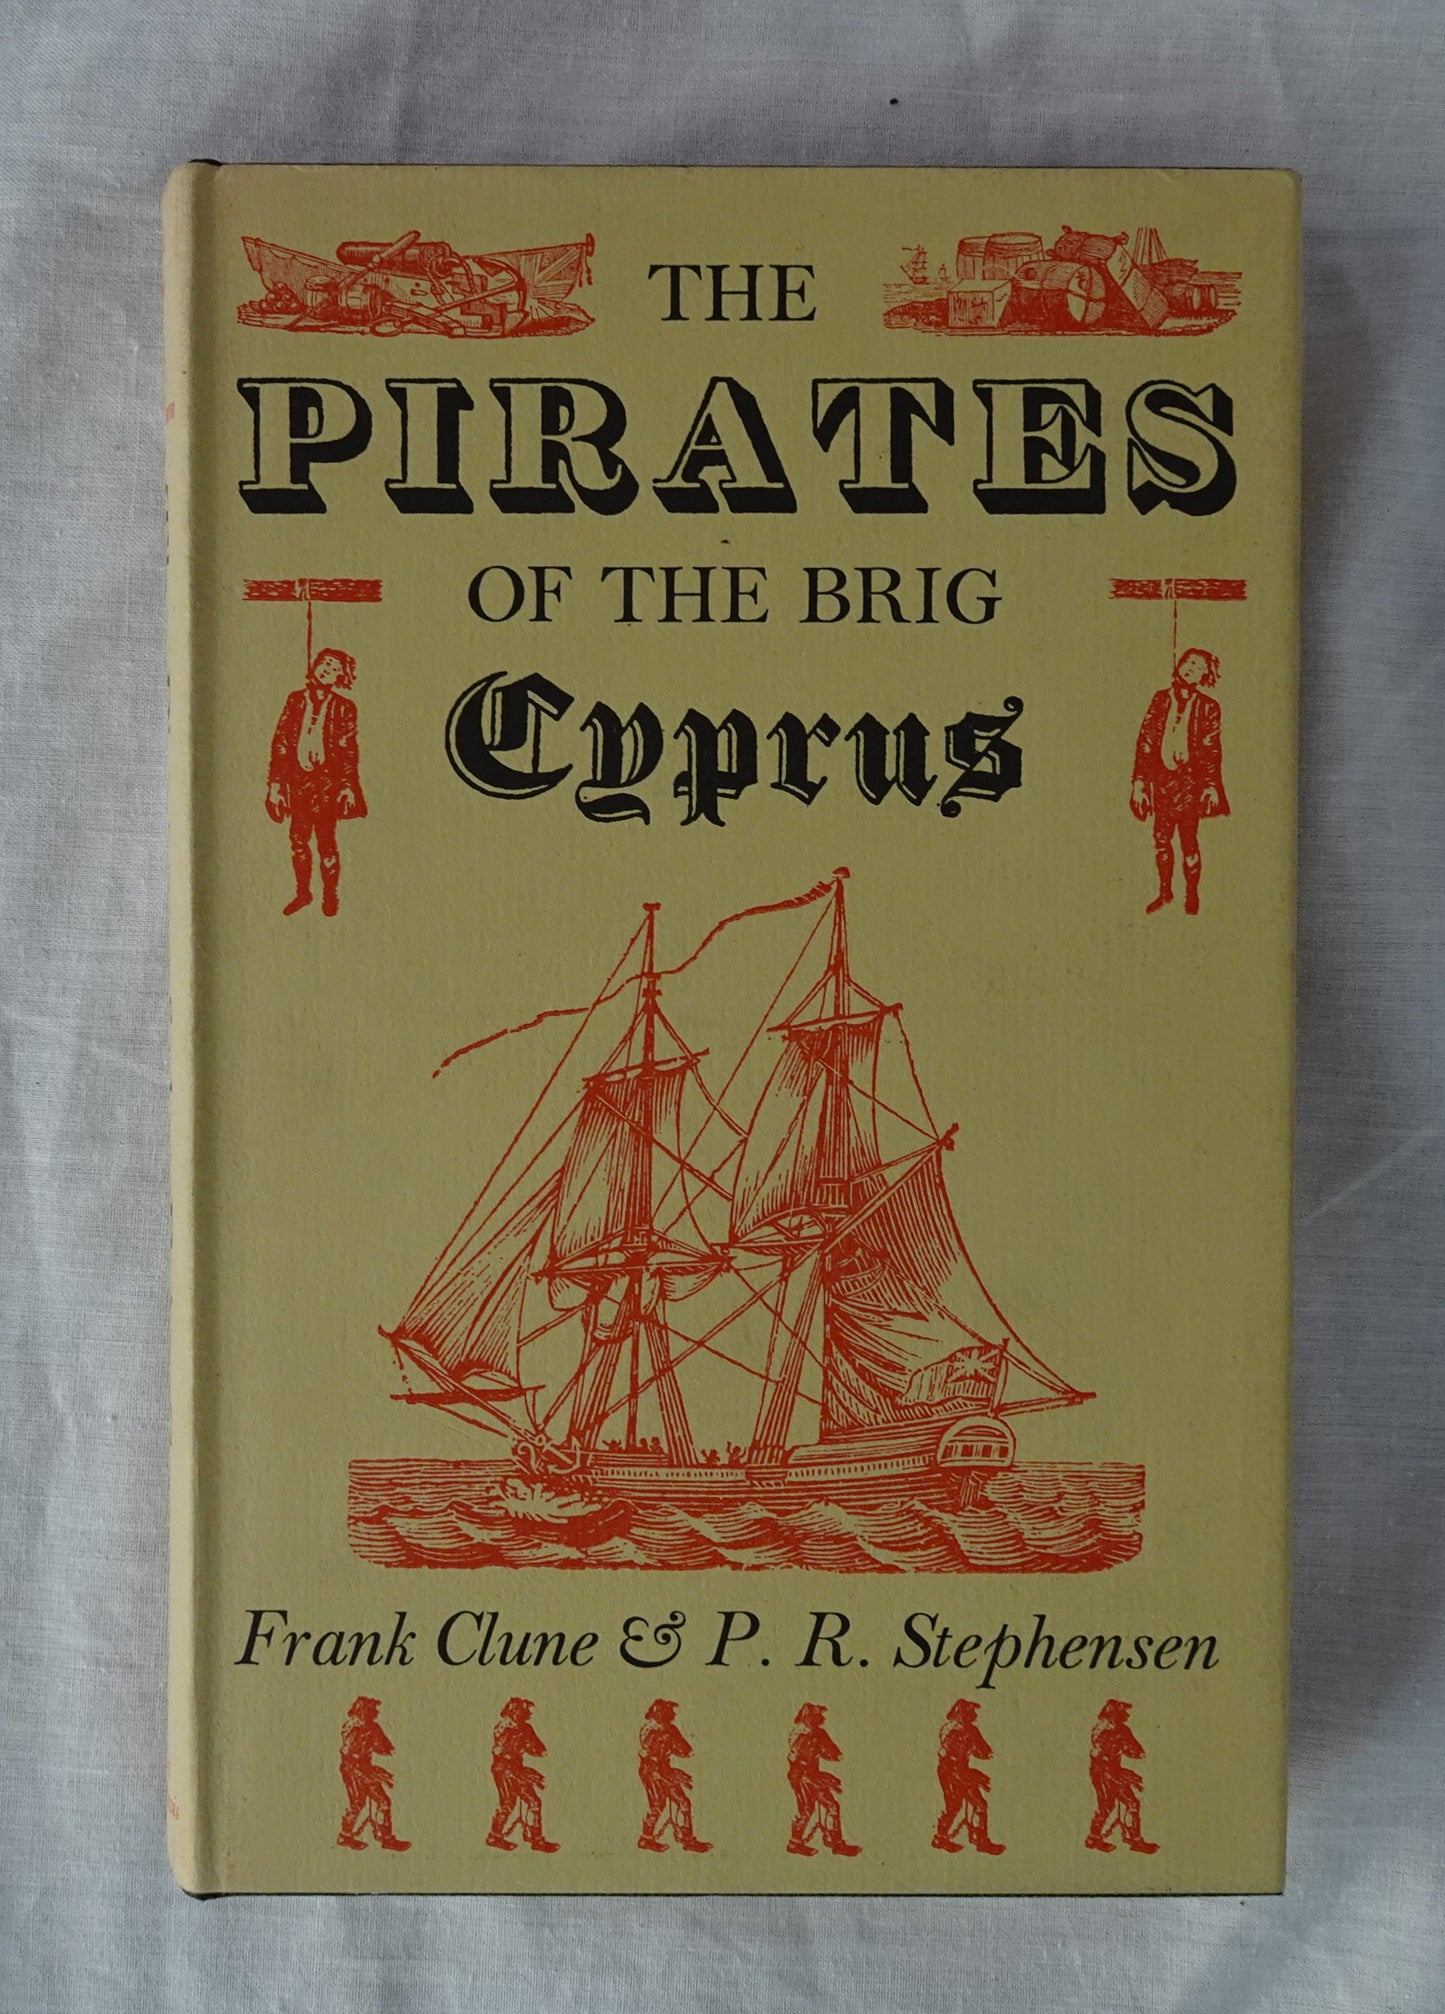 The Pirates of the Brig Cyprus by Frank Clune and P. R. Stephensen